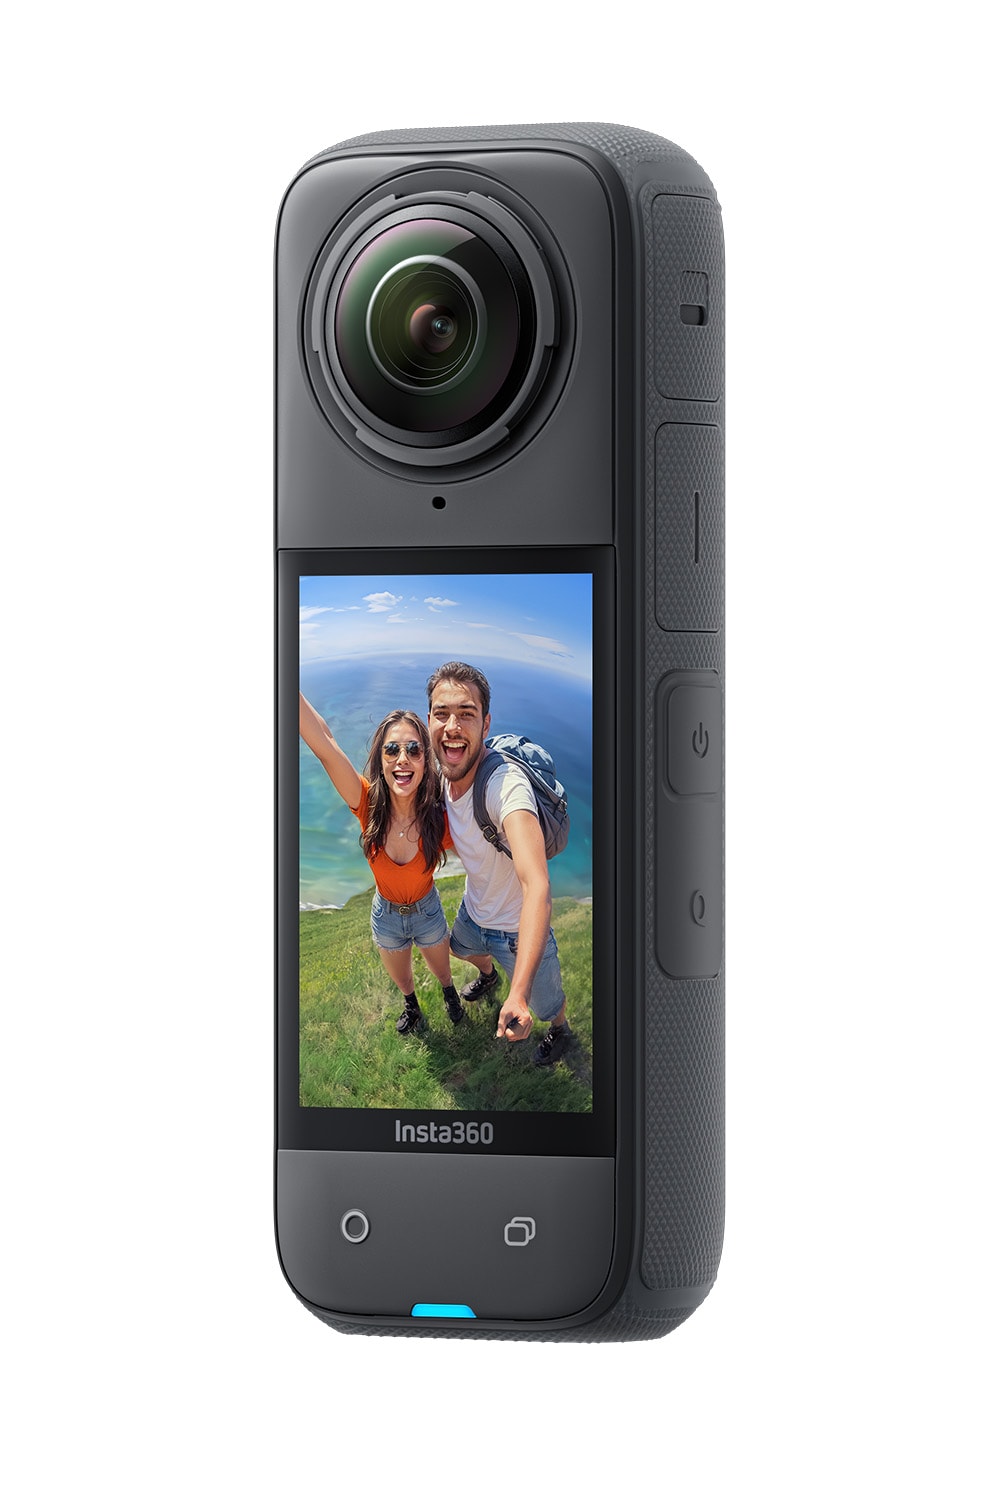 Insta360 Announces 'X4' Action Camera Capable of 8K 360° Video GoPro